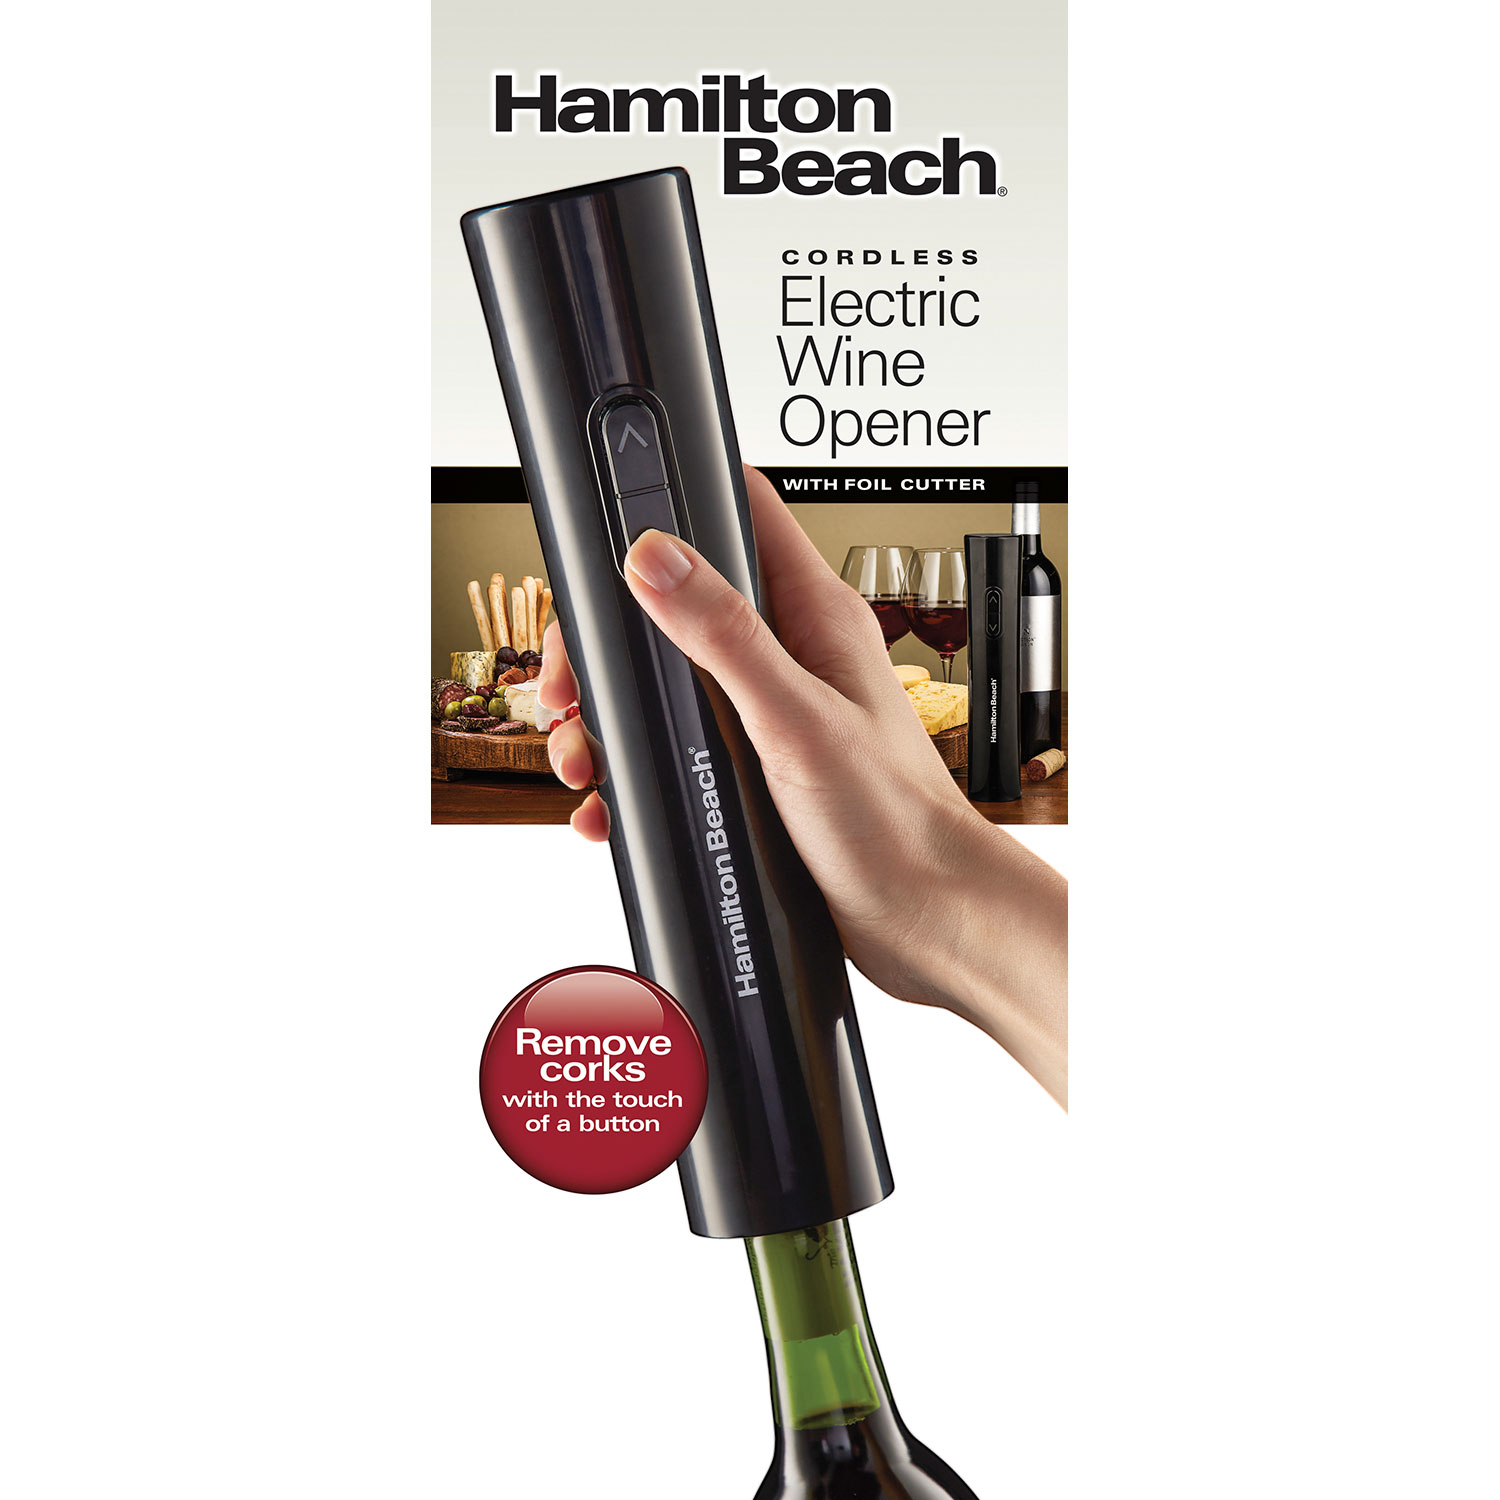 Hamilton Beach 76610 Electric Wine Opener Cordless Foil Cutter Portable Design Black One with Charger